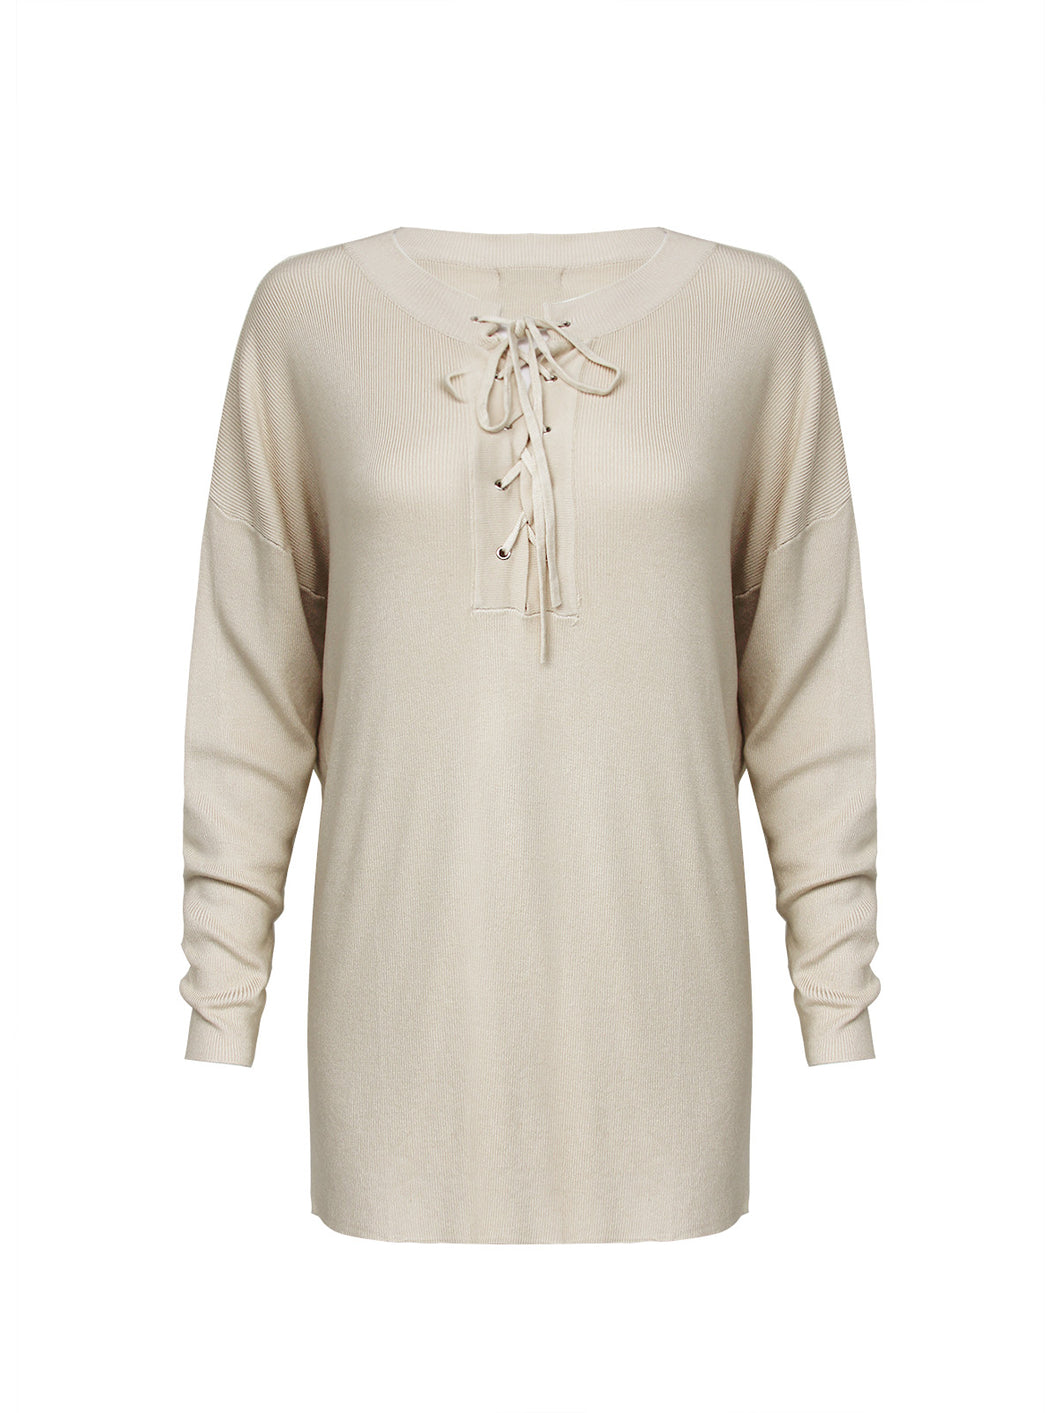 Anna Smith lace up front long sleeves oversized knitted jumper